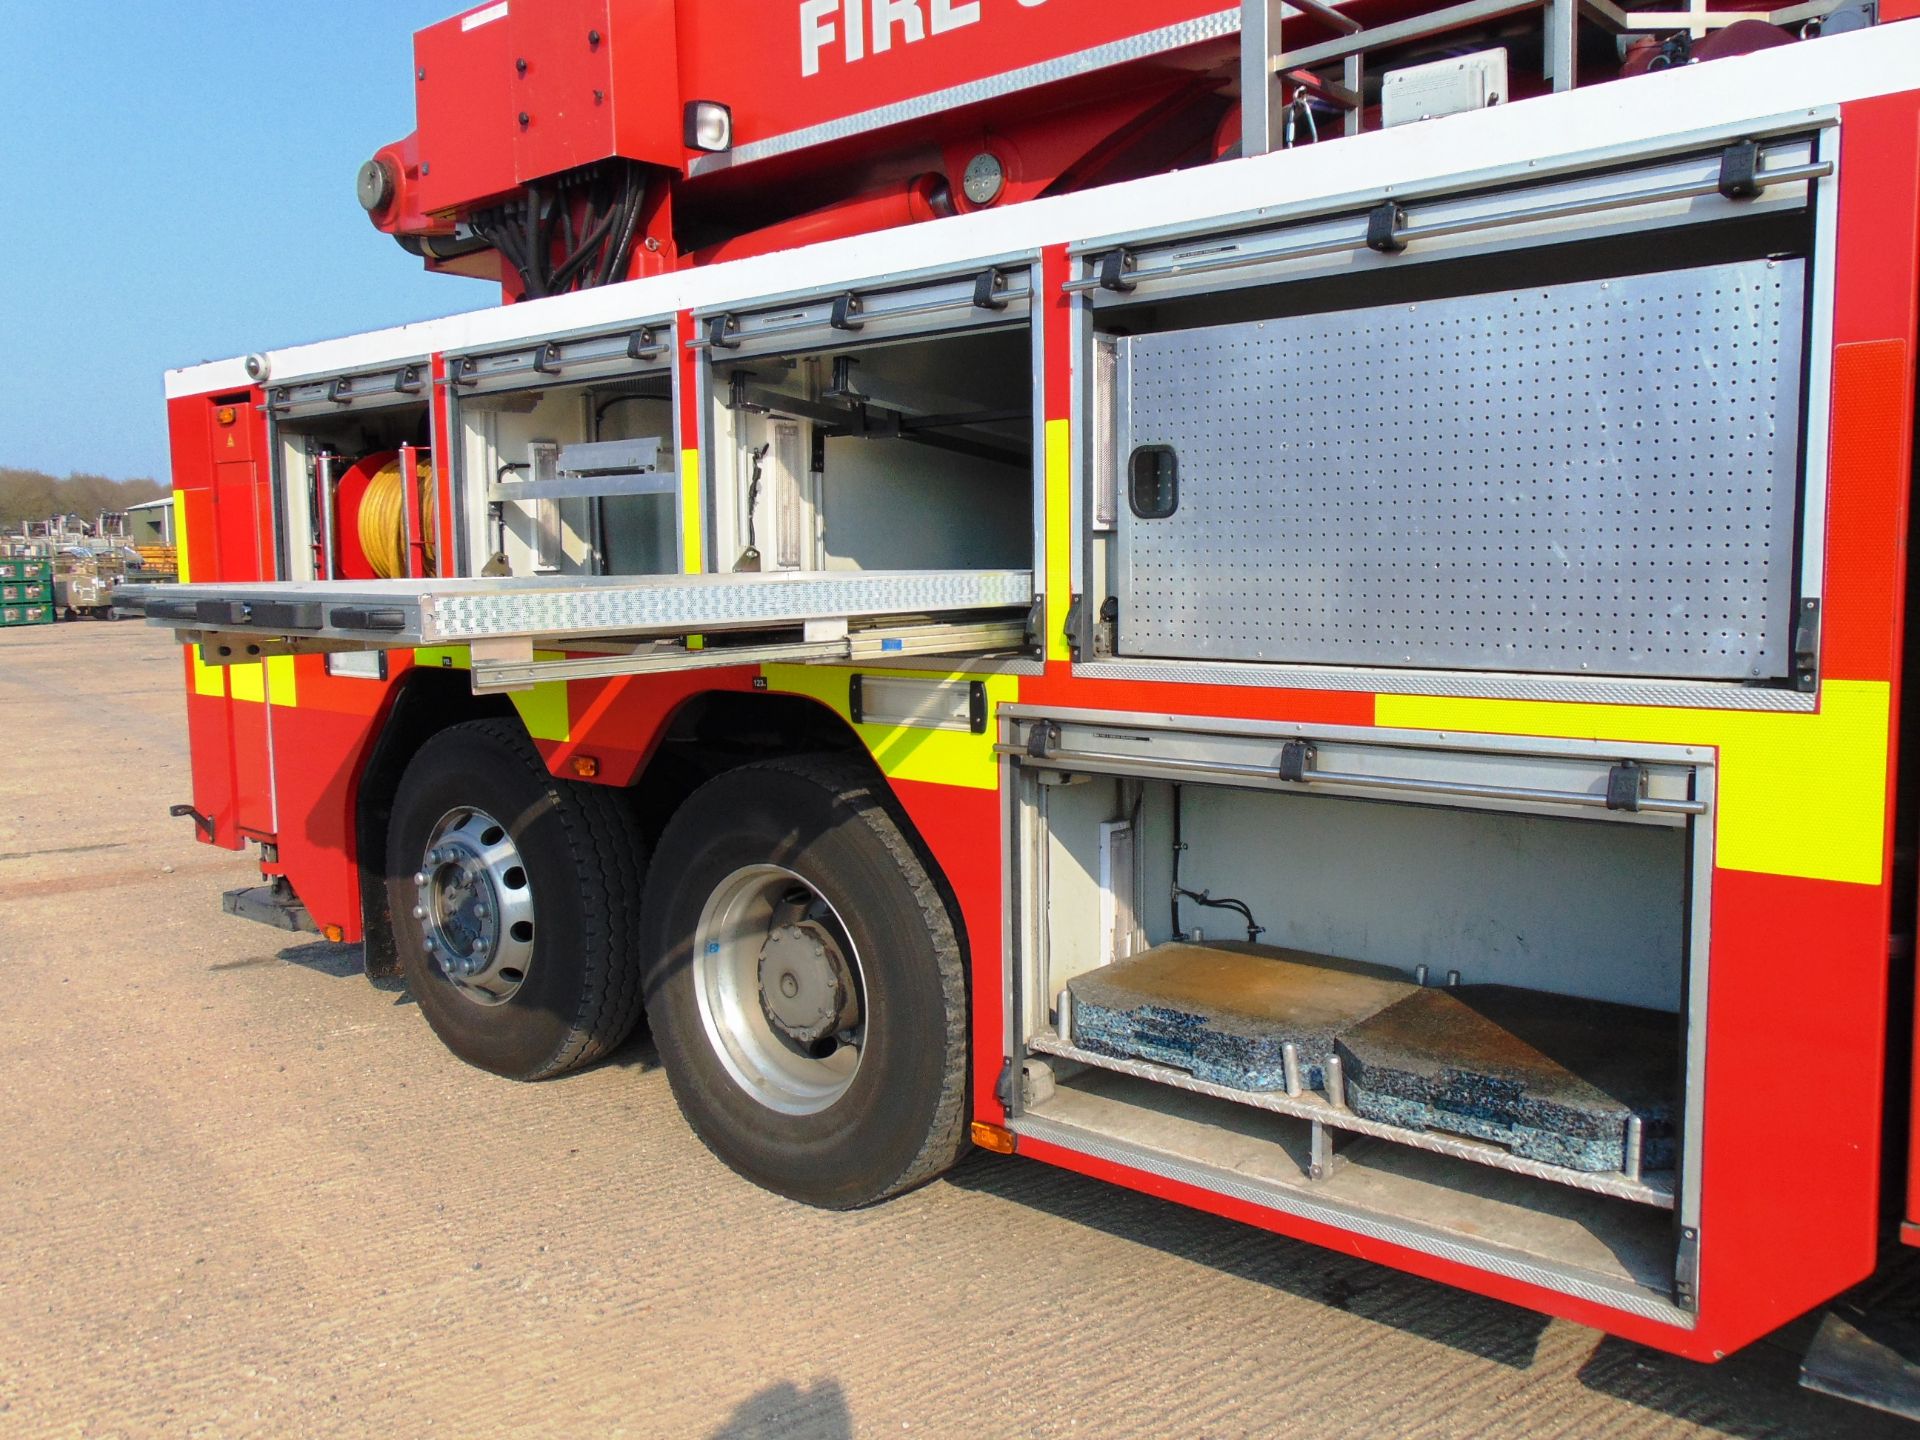 2008 Mercedes Econic CARP (Combined Aerial Rescue Pump) 6x2 Aerial Work Platform / Fire Appliance - Image 27 of 49